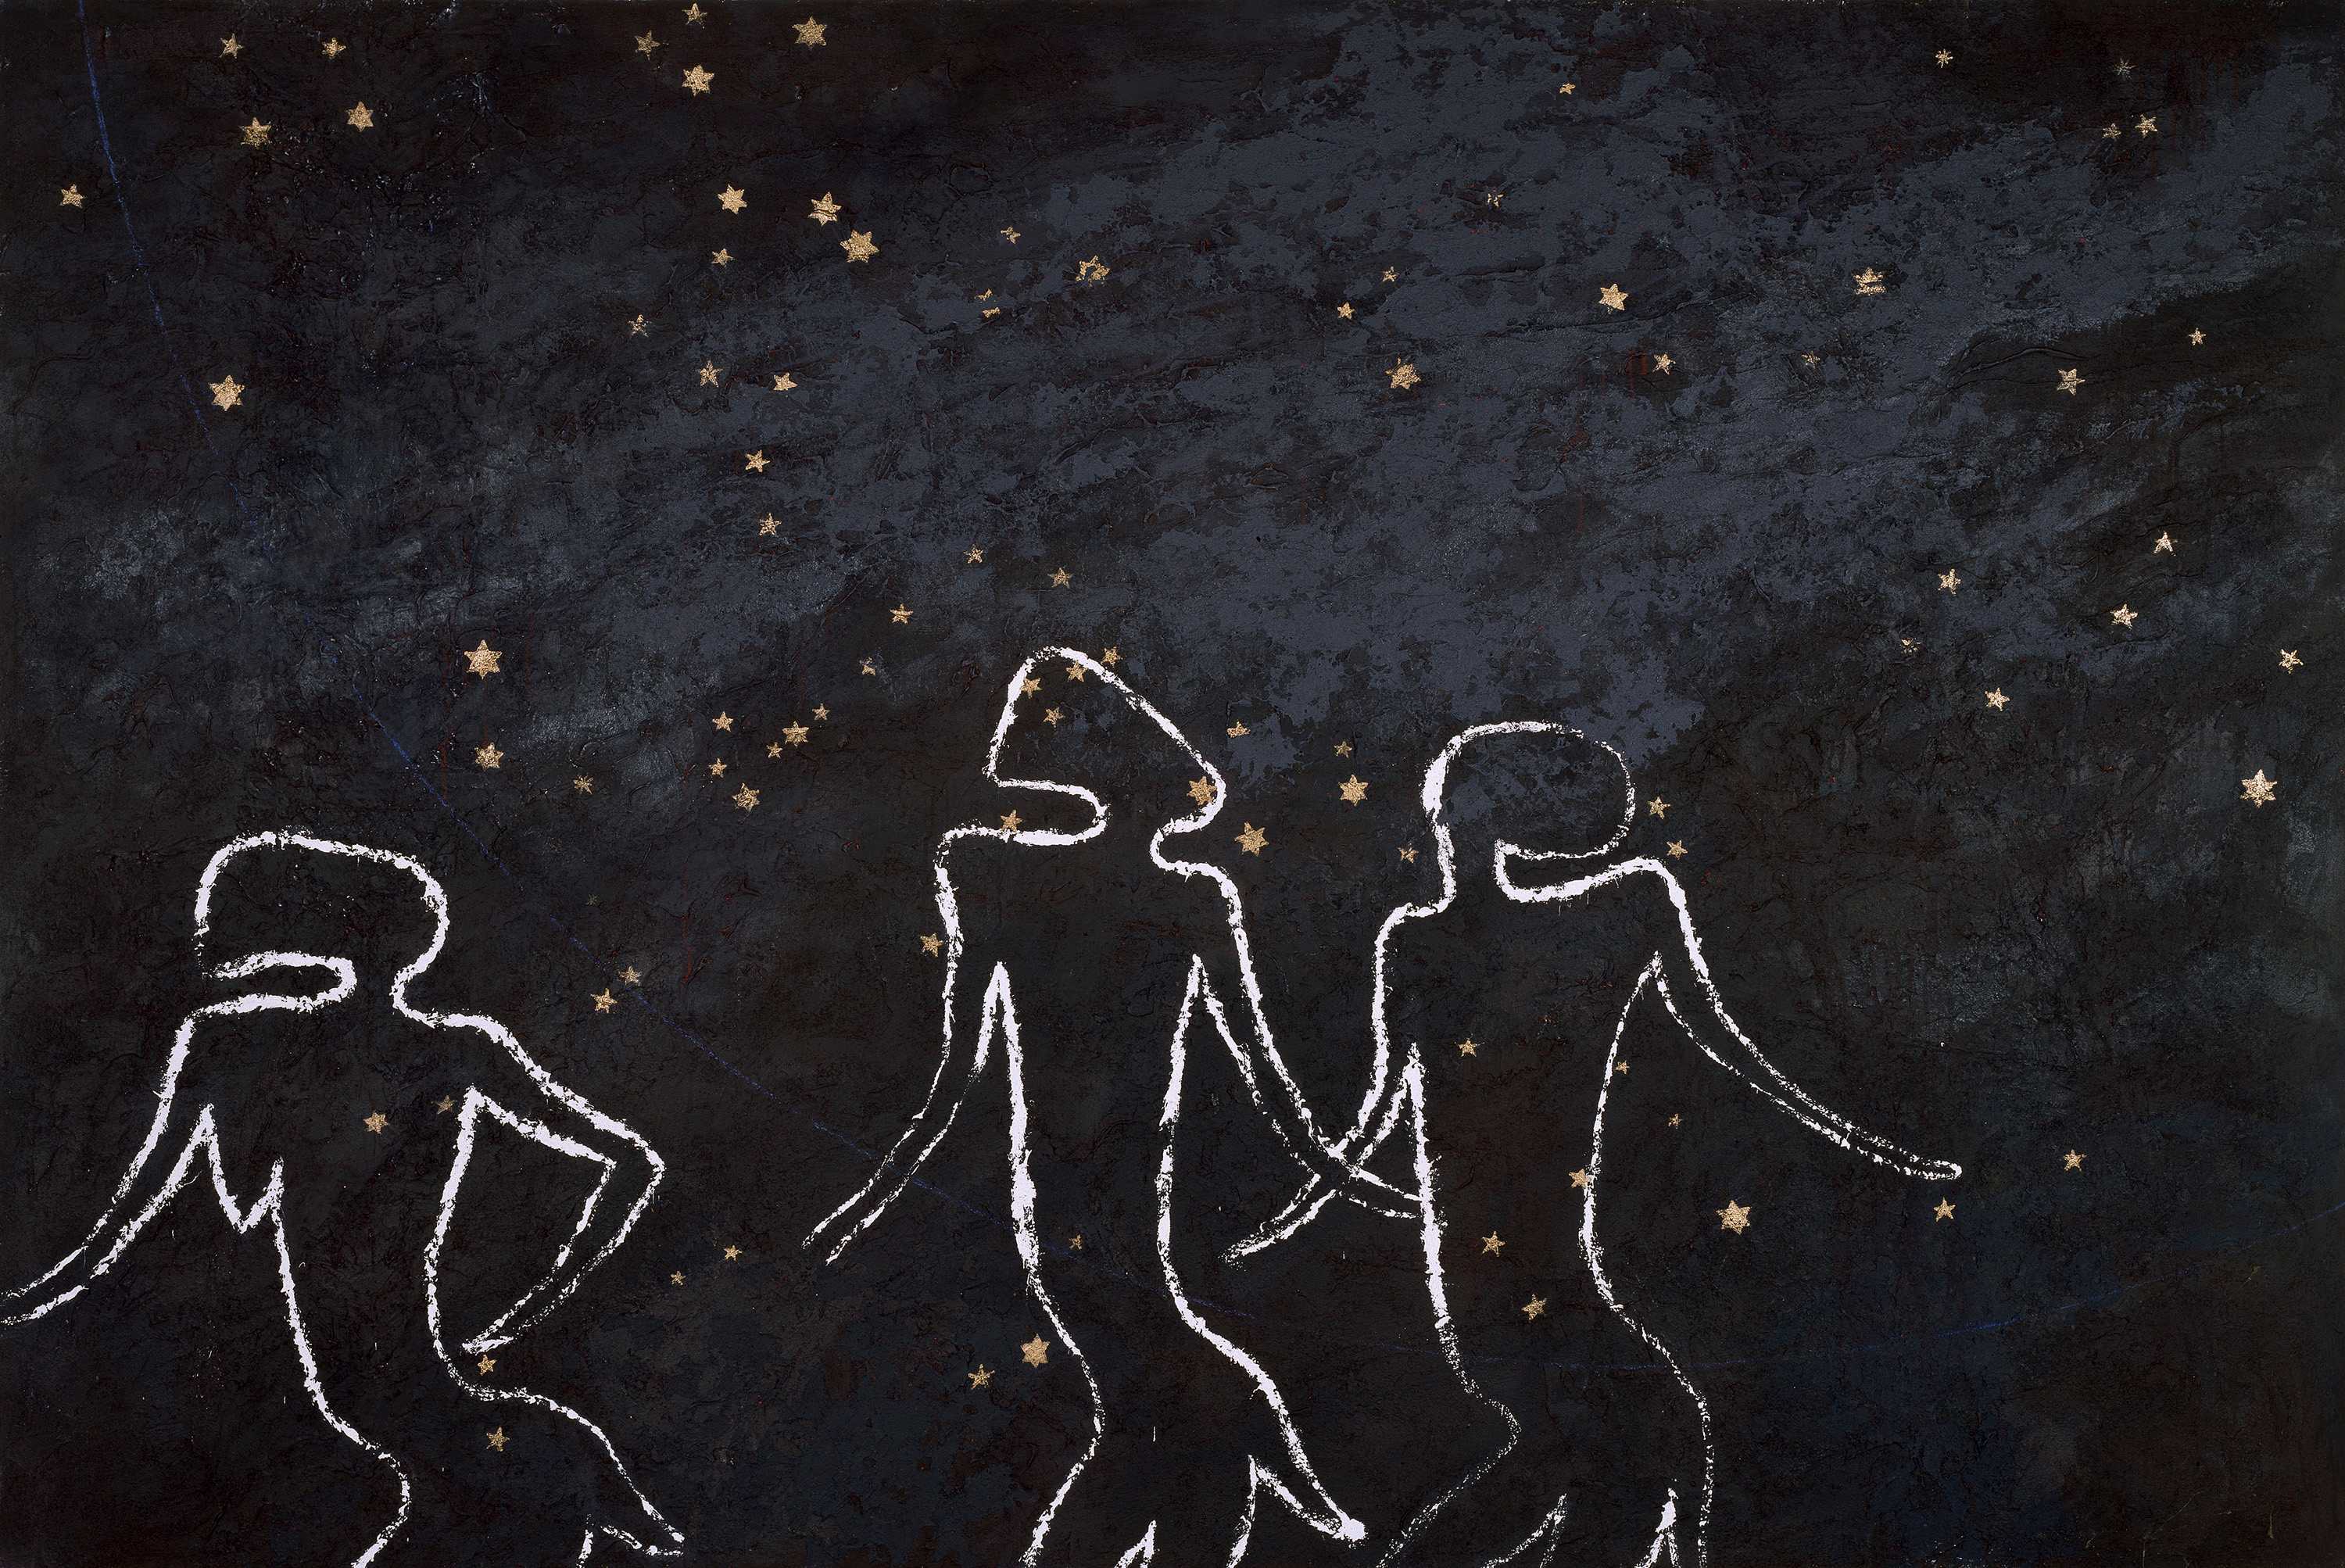 A drawing with three white-outlined figures gazing and exploring the dark sky and yellow stars above.